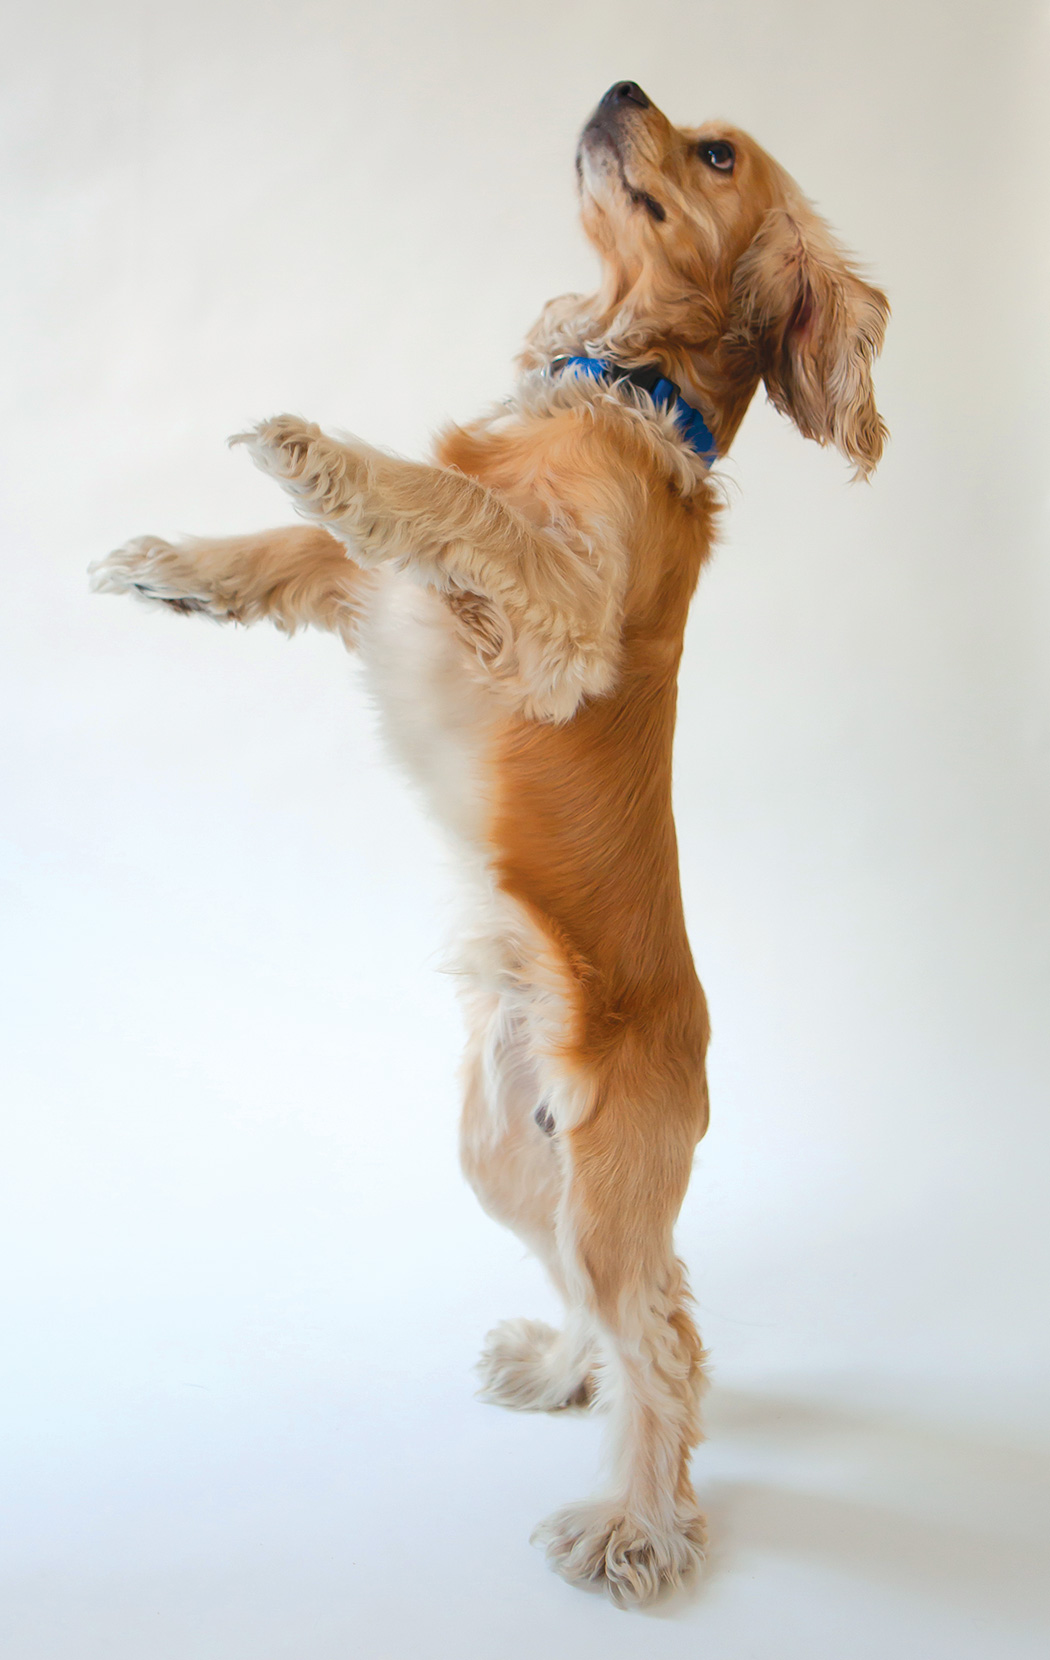 A small beige dog with a blue collar stretching upward on its hind legs.